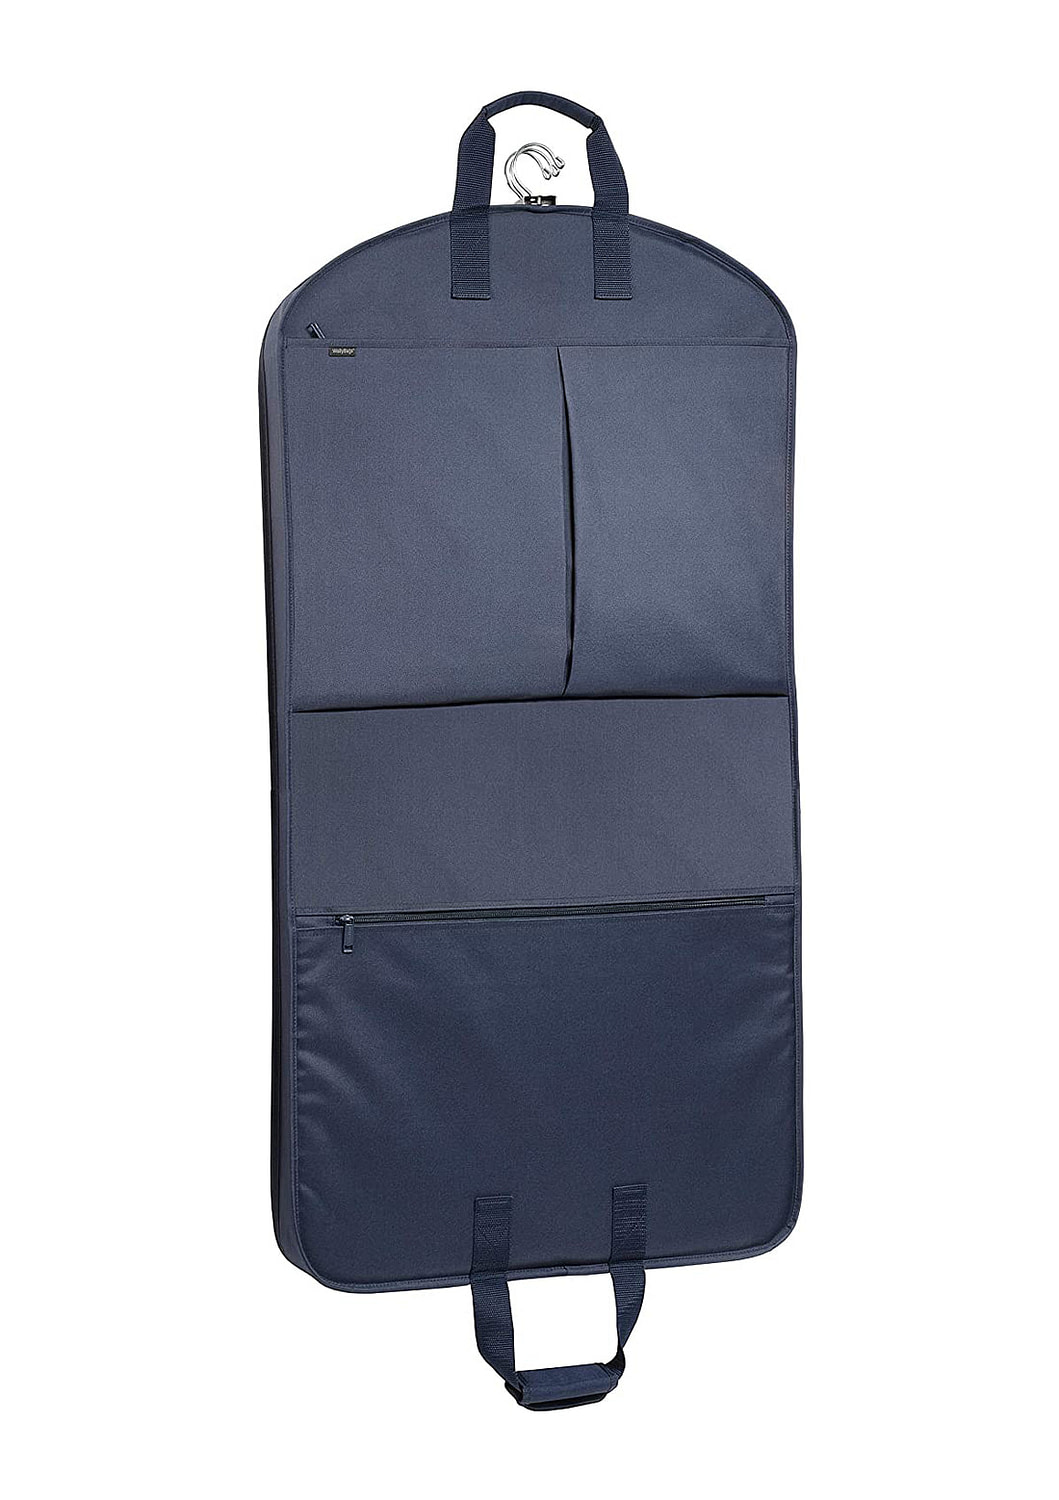 Large Capacity Garment Bag with Pockets